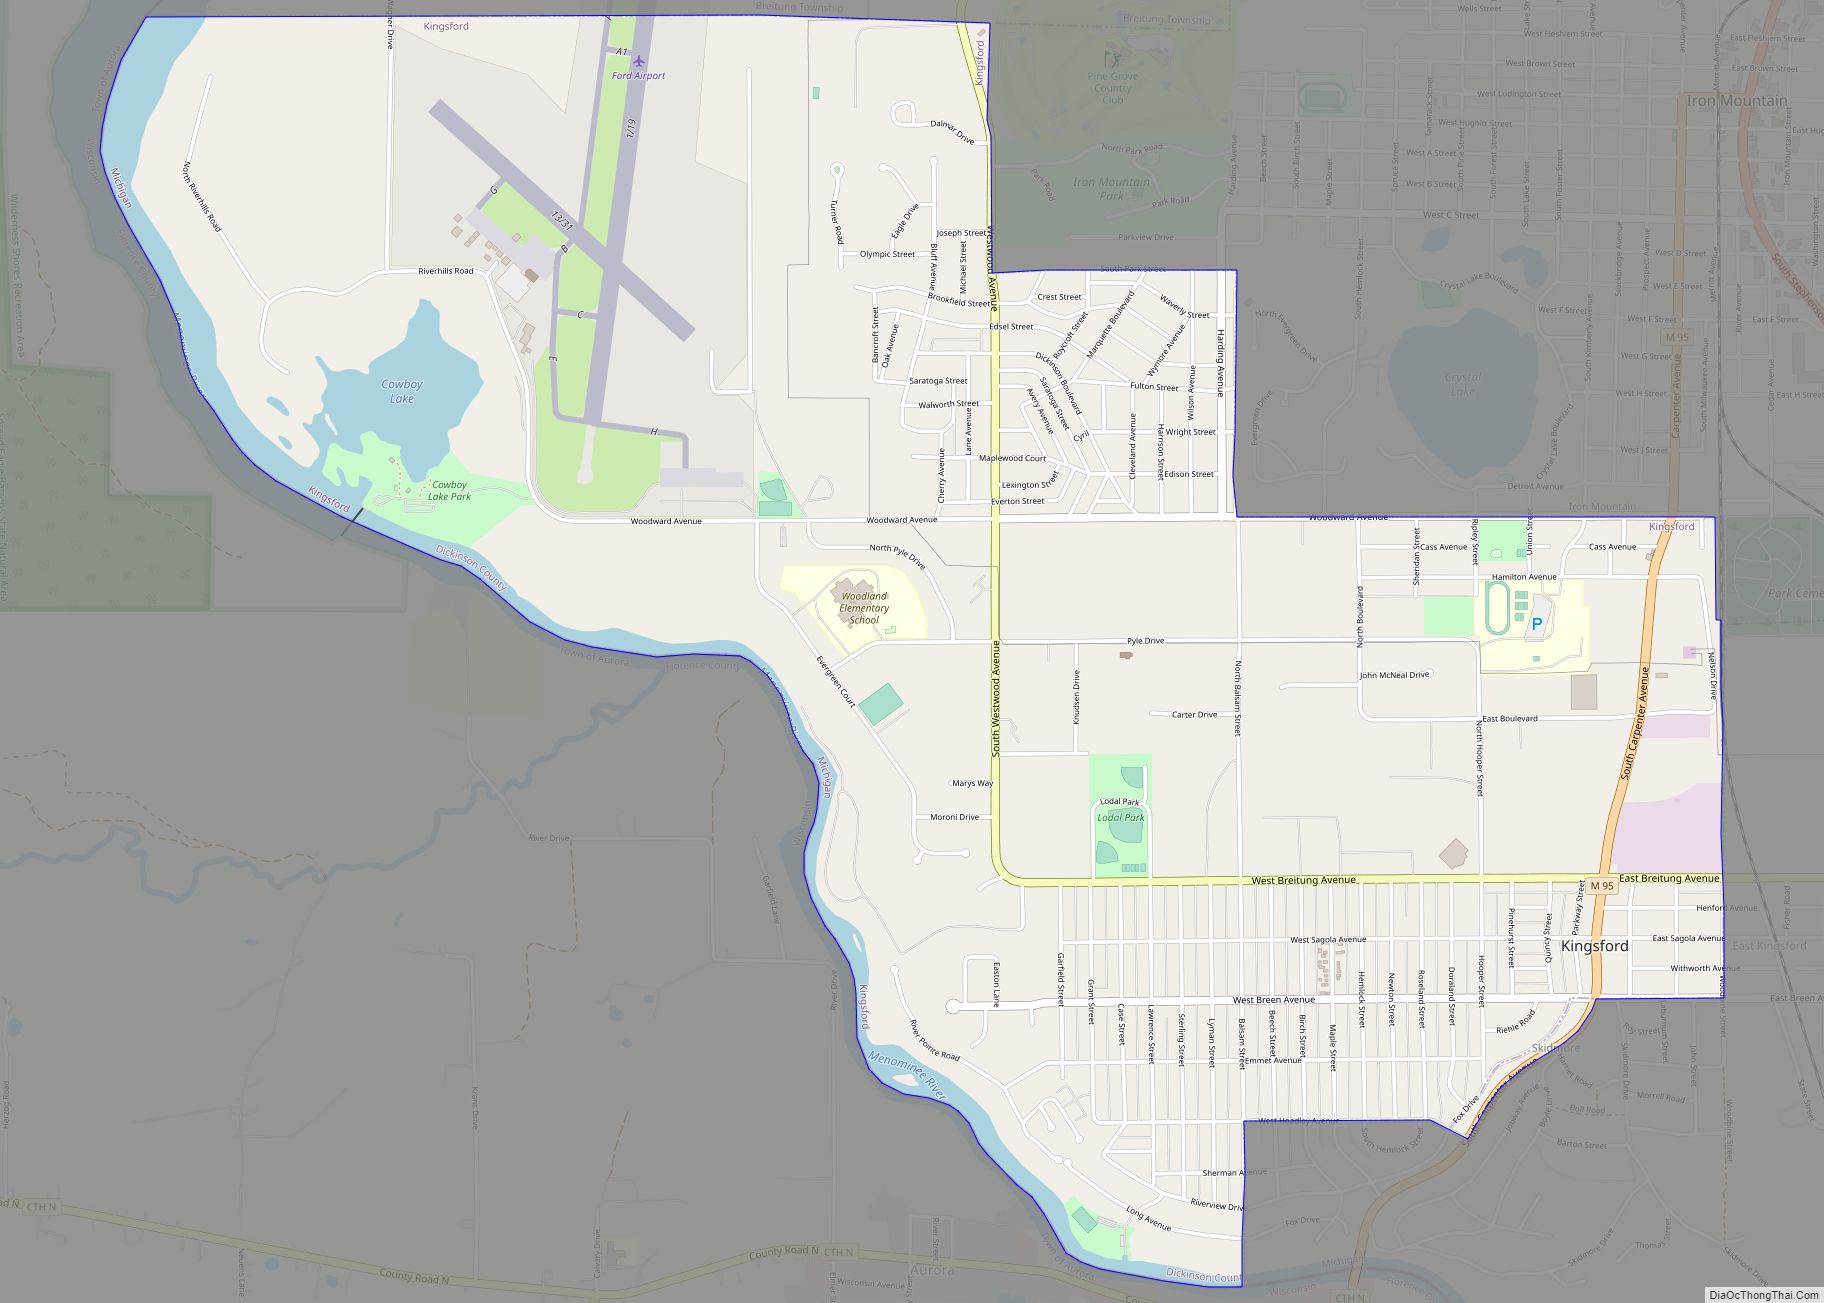 Map of Kingsford city